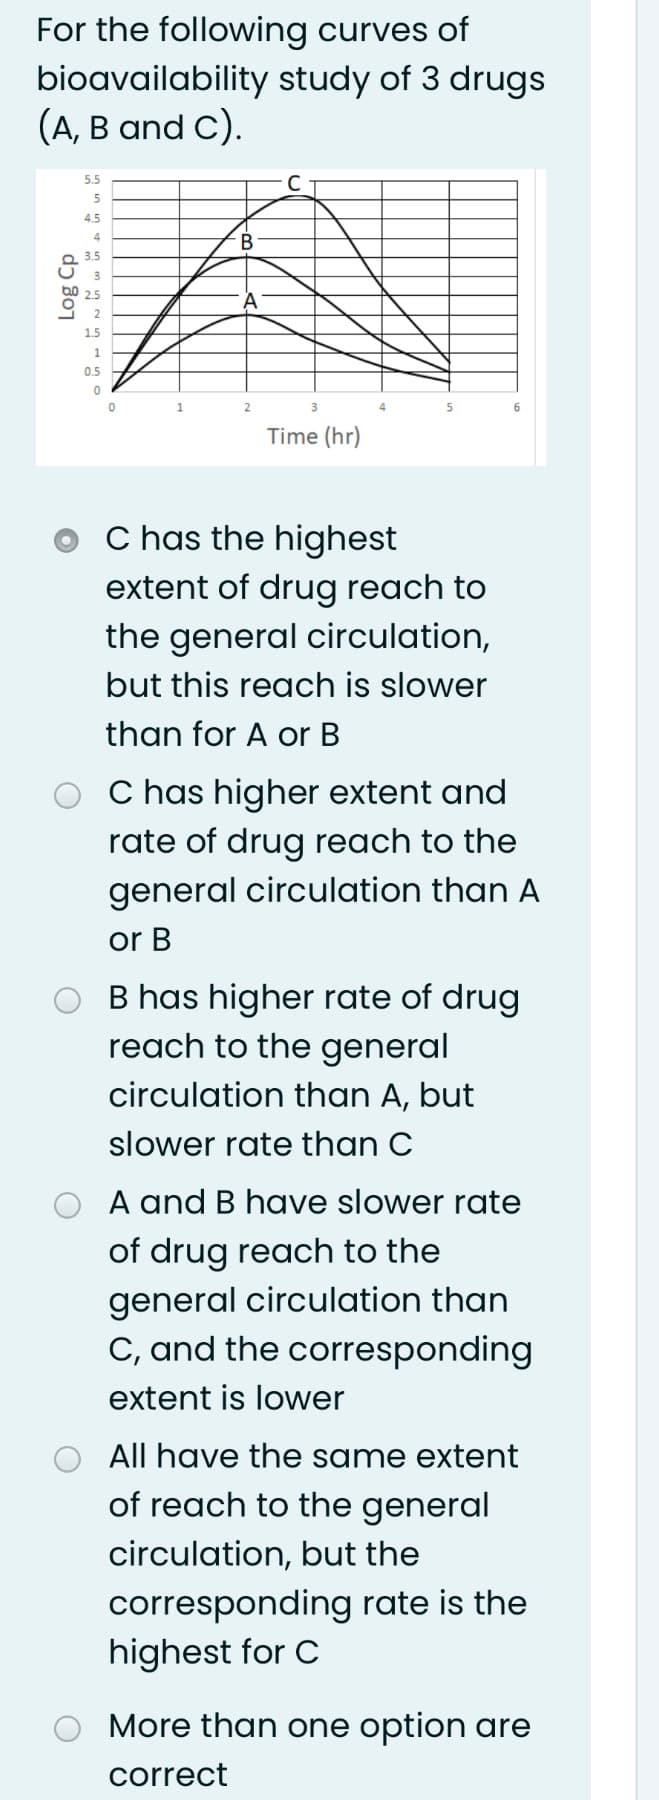 For the following curves of
bioavailability study of 3 drugs
(А, В and C).
5.5
4.5
4
В
3.5
1.5
0.5
1
Time (hr)
C has the highest
extent of drug reach to
the general circulation,
but this reach is slower
than for A or B
C has higher extent and
rate of drug reach to the
general circulation than A
or B
B has higher rate of drug
reach to the general
circulation than A, but
slower rate than C
A and B have slower rate
of drug reach to the
general circulation than
C, and the corresponding
extent is lower
All have the same extent
of reach to the general
circulation, but the
corresponding rate is the
highest for C
More than one option are
correct
Log Cp
